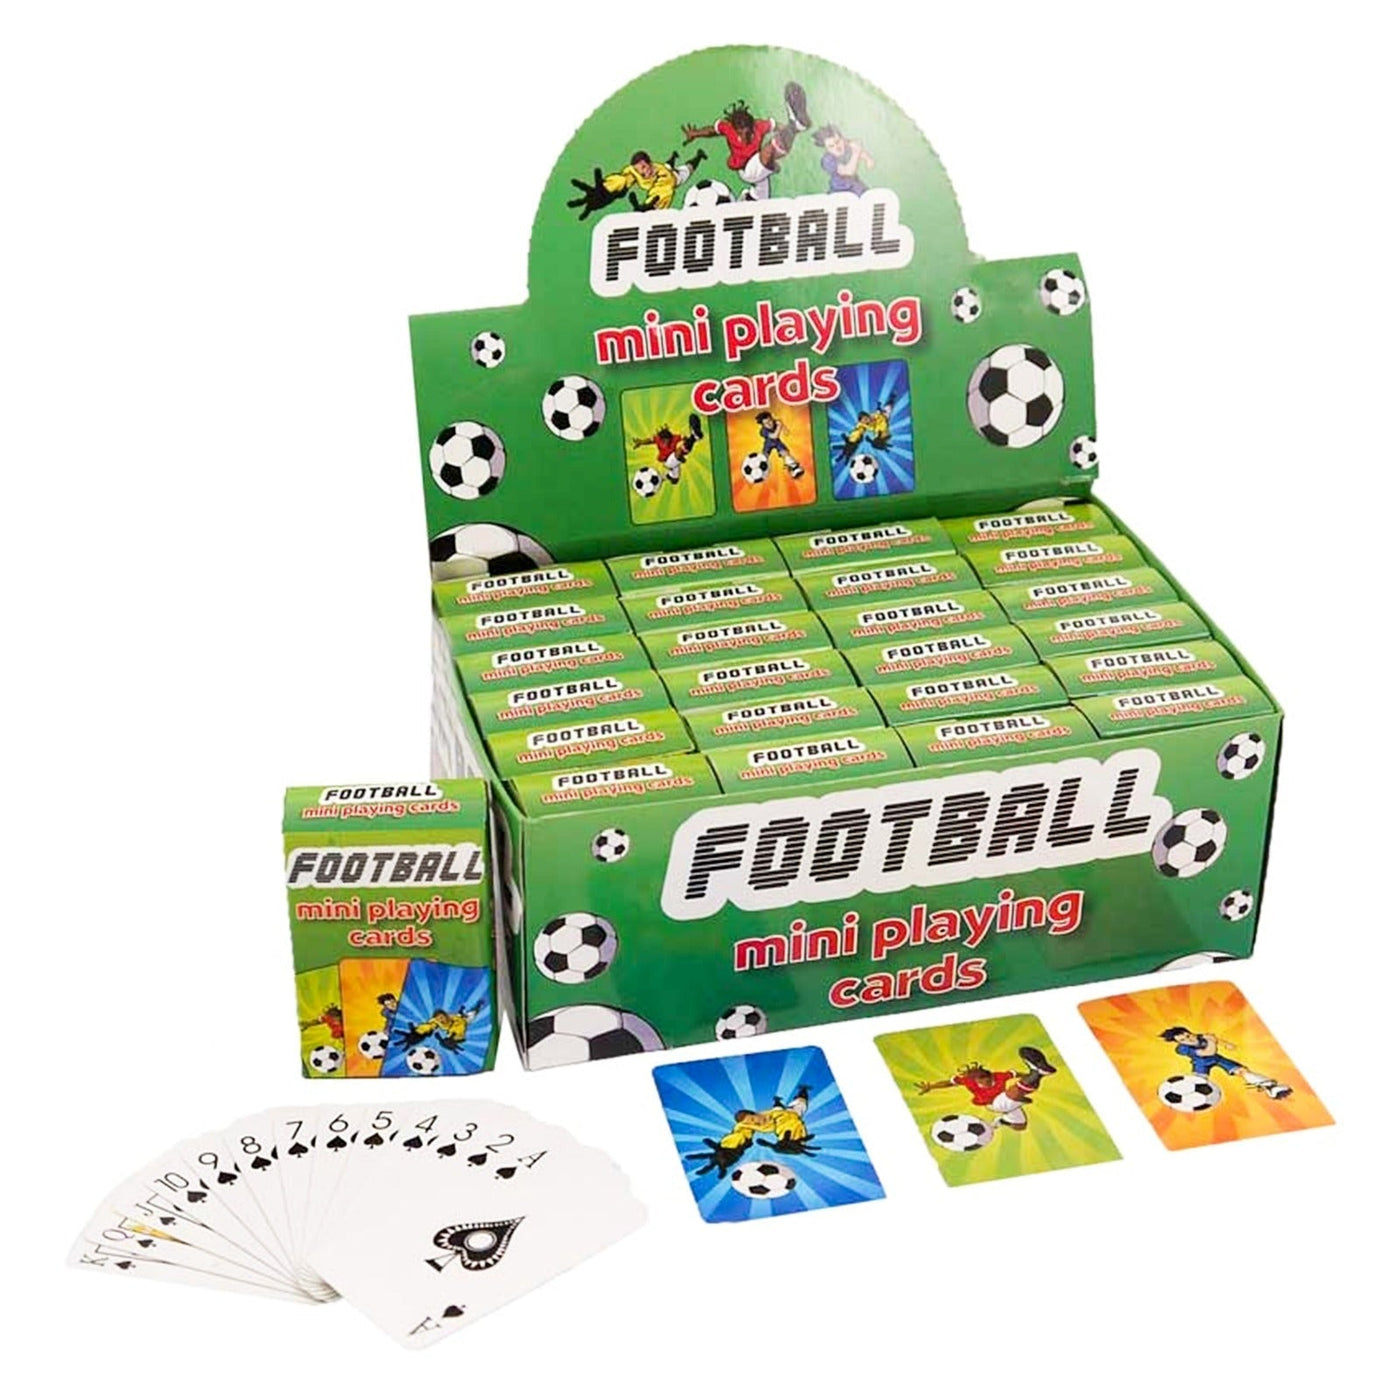 Pre-filled Green Football Birthday Party, Favours Goodie Bags With Sweets And Toys For Children.